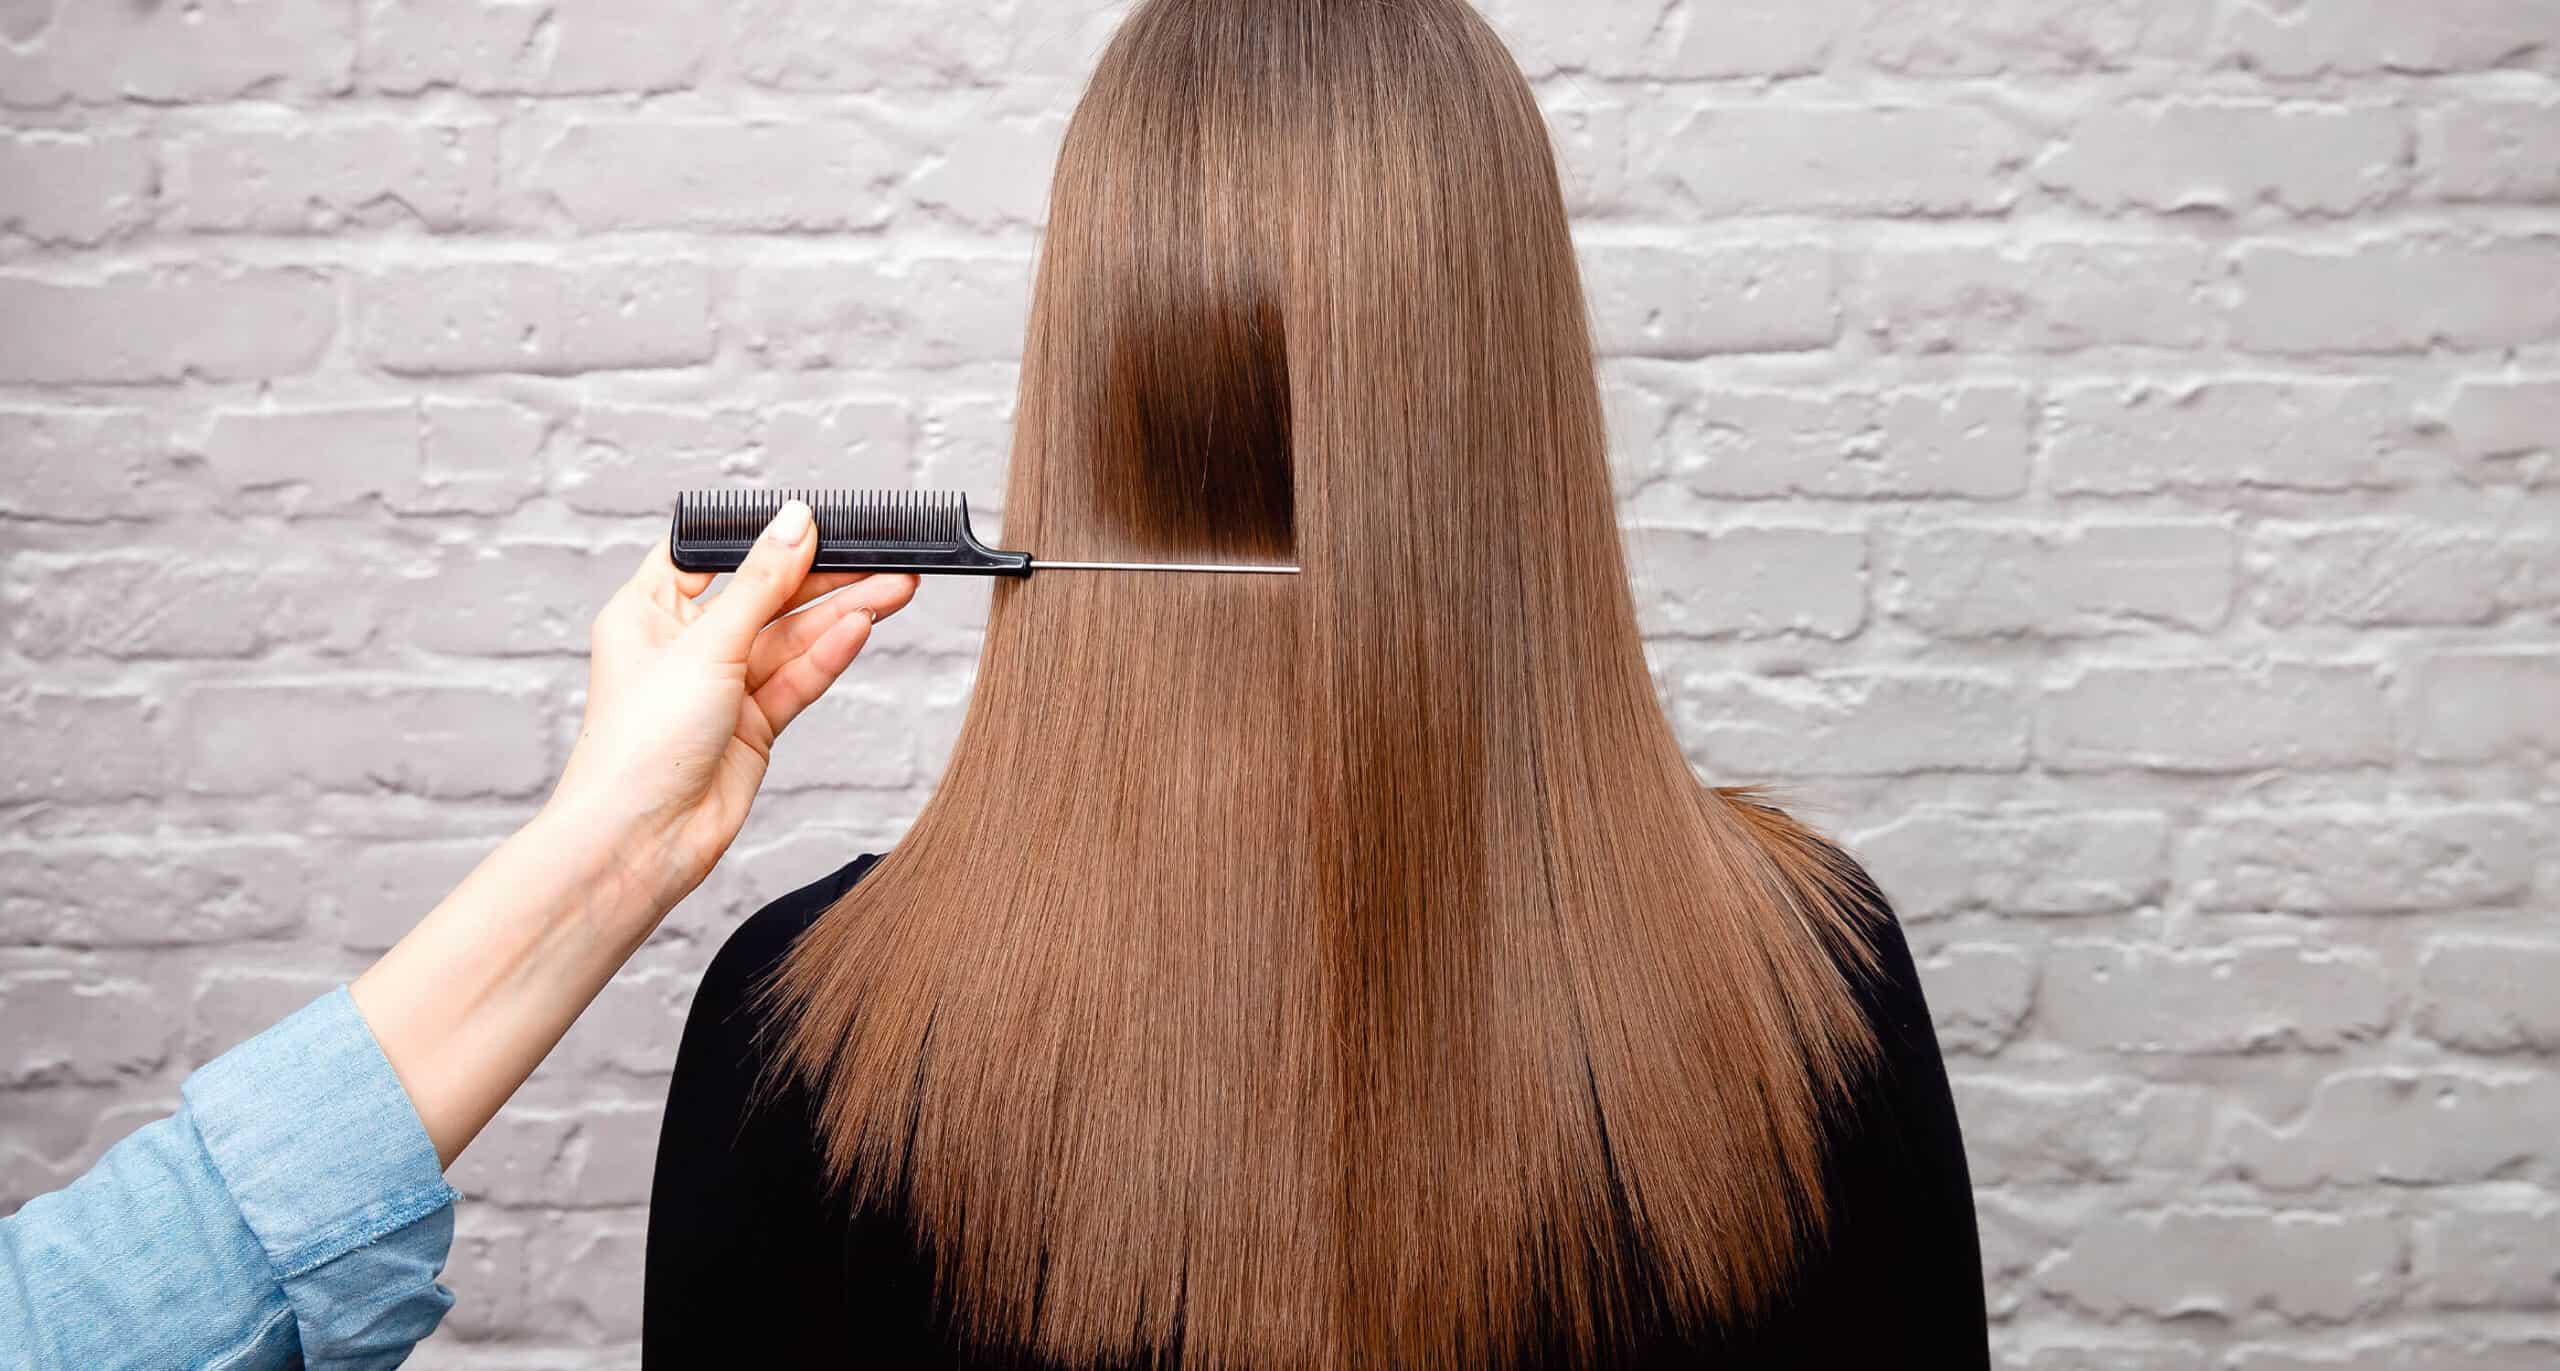 How Much Does a Keratin Treatment Cost? - StyleSeat